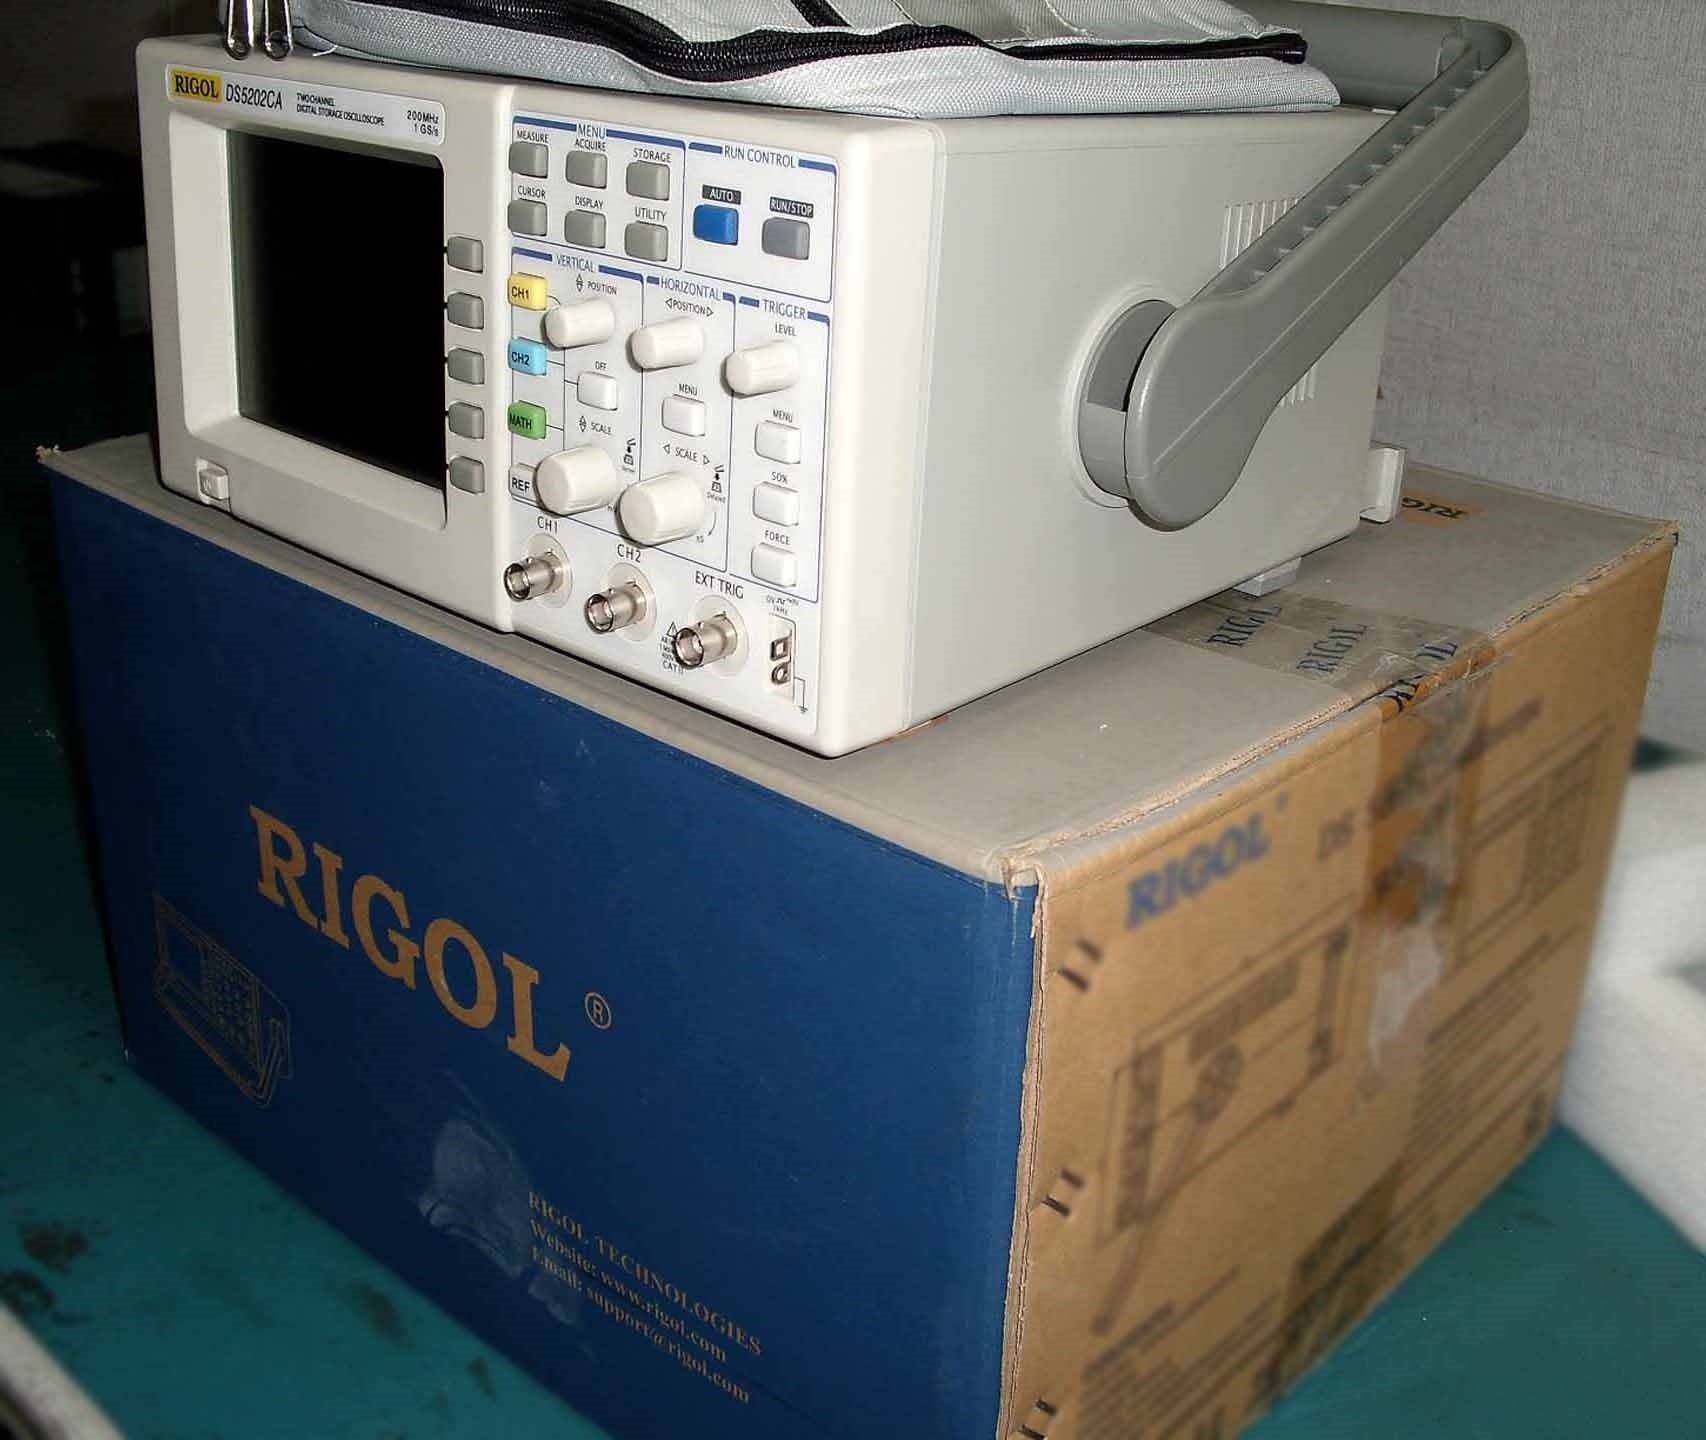 Photo Used RIGOL DS5202CA For Sale